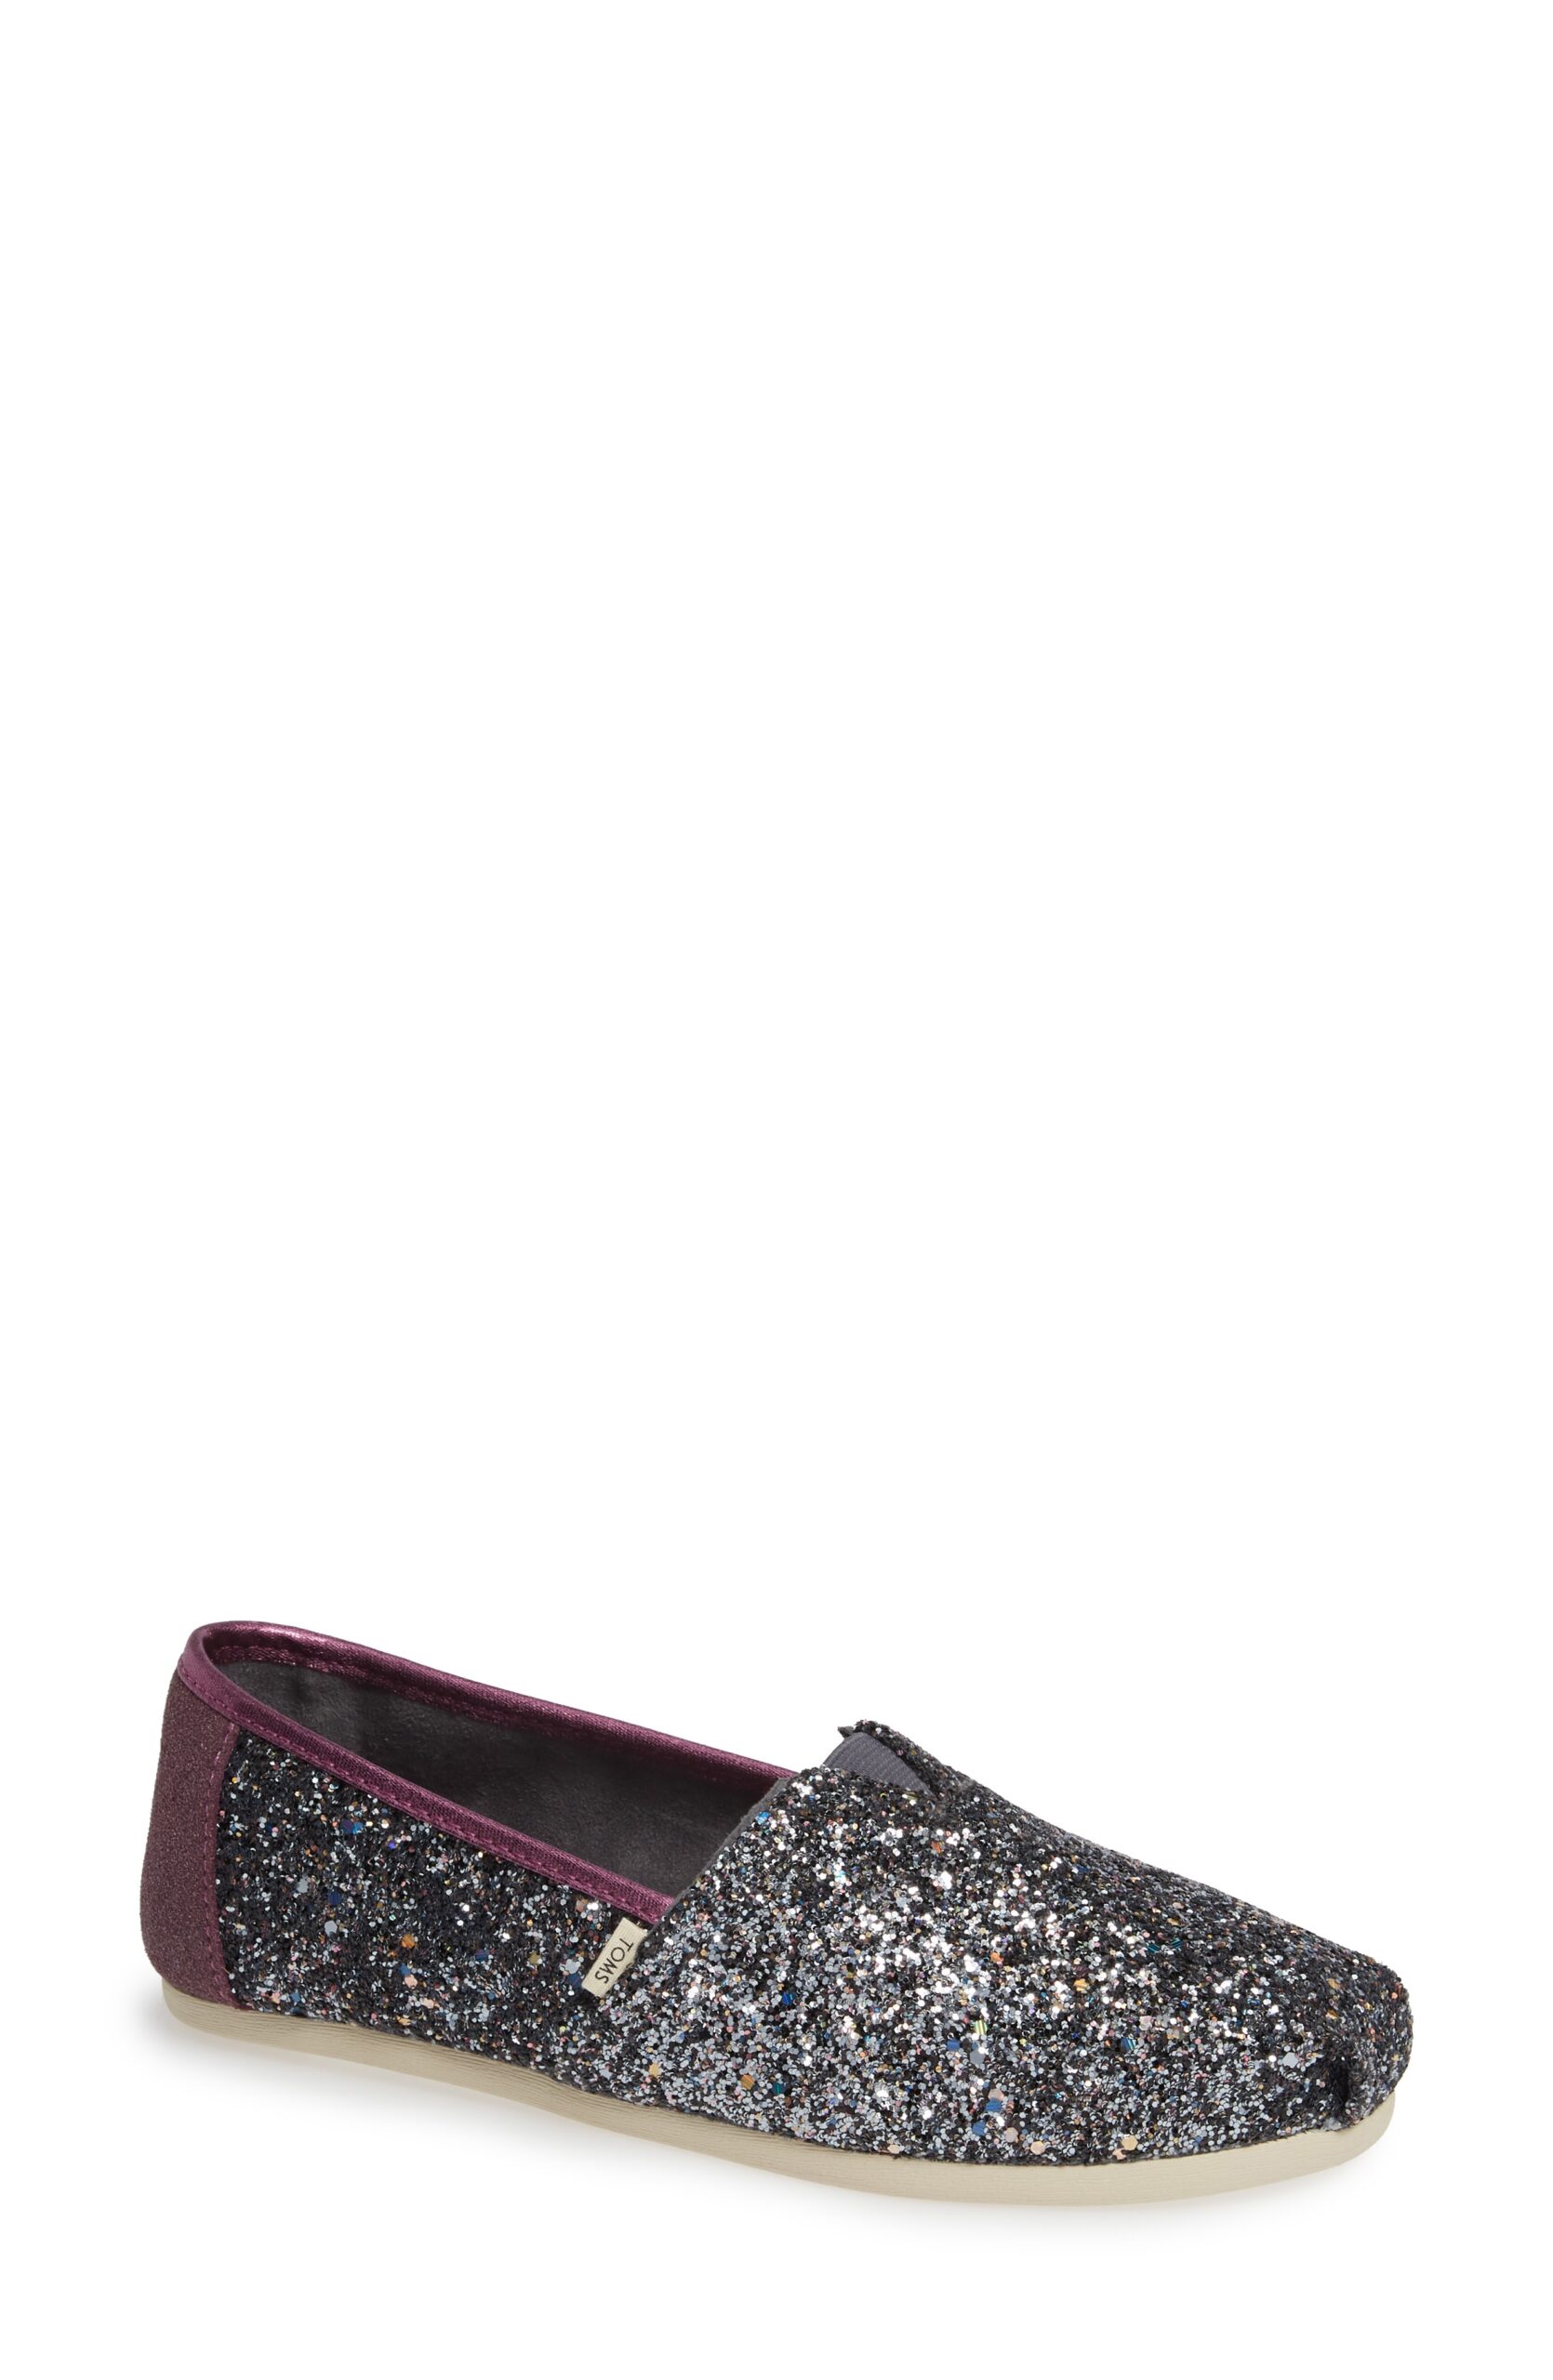 Get stylish glitter flats for attraction